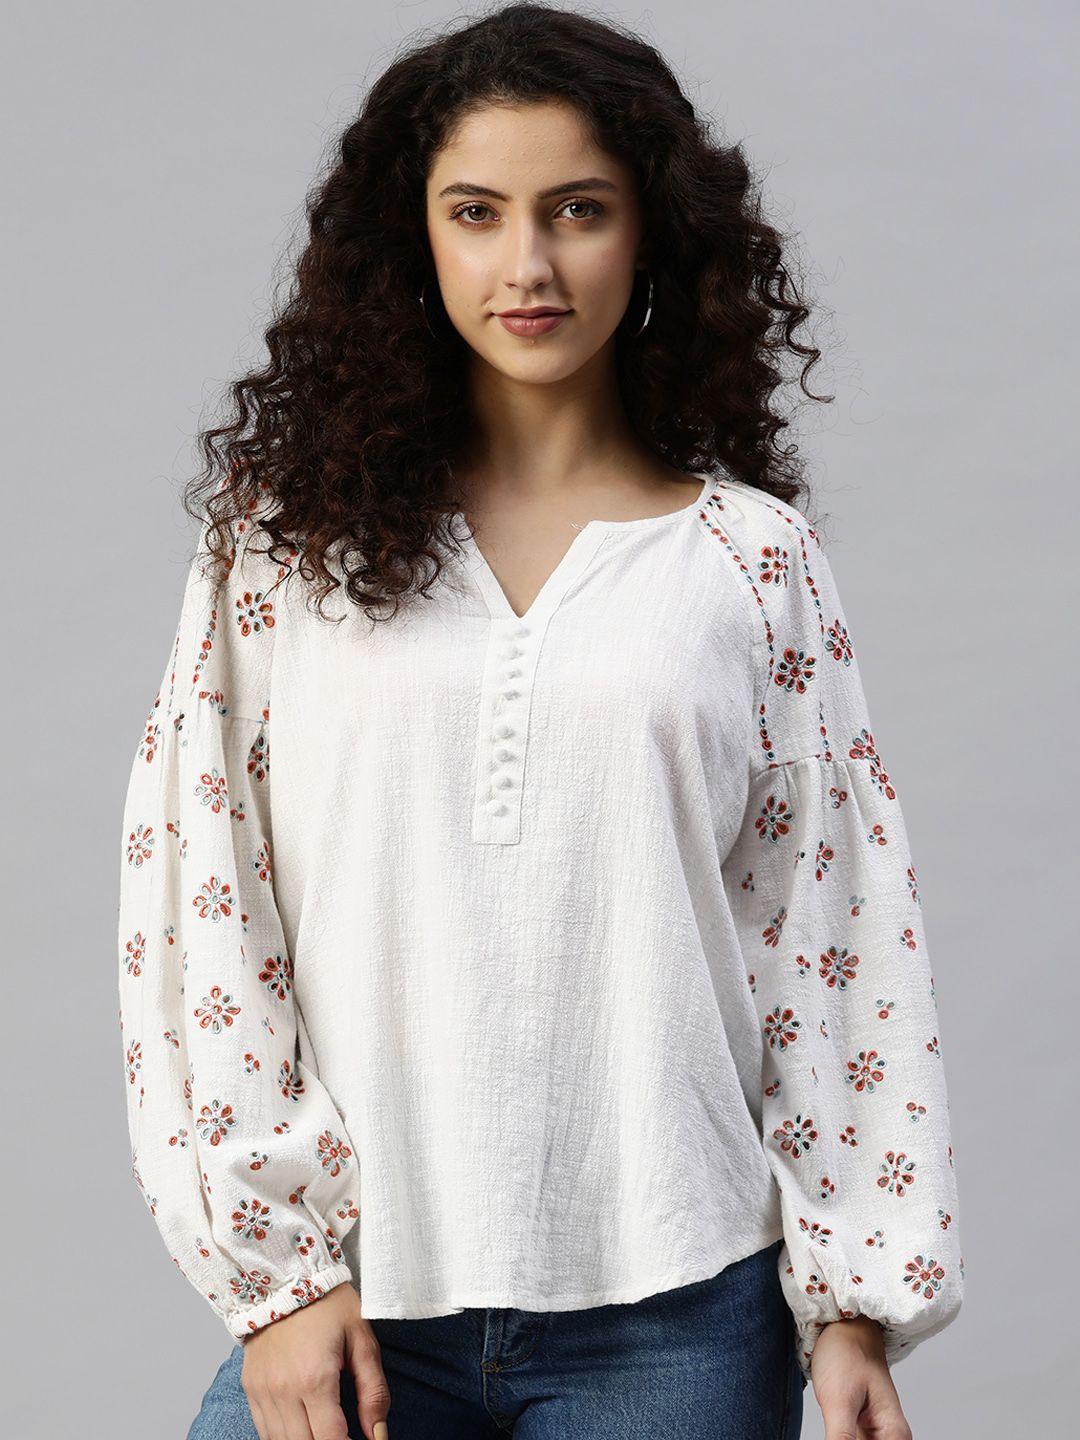 marks-&-spencer-white-&-red-floral-embroidered-top